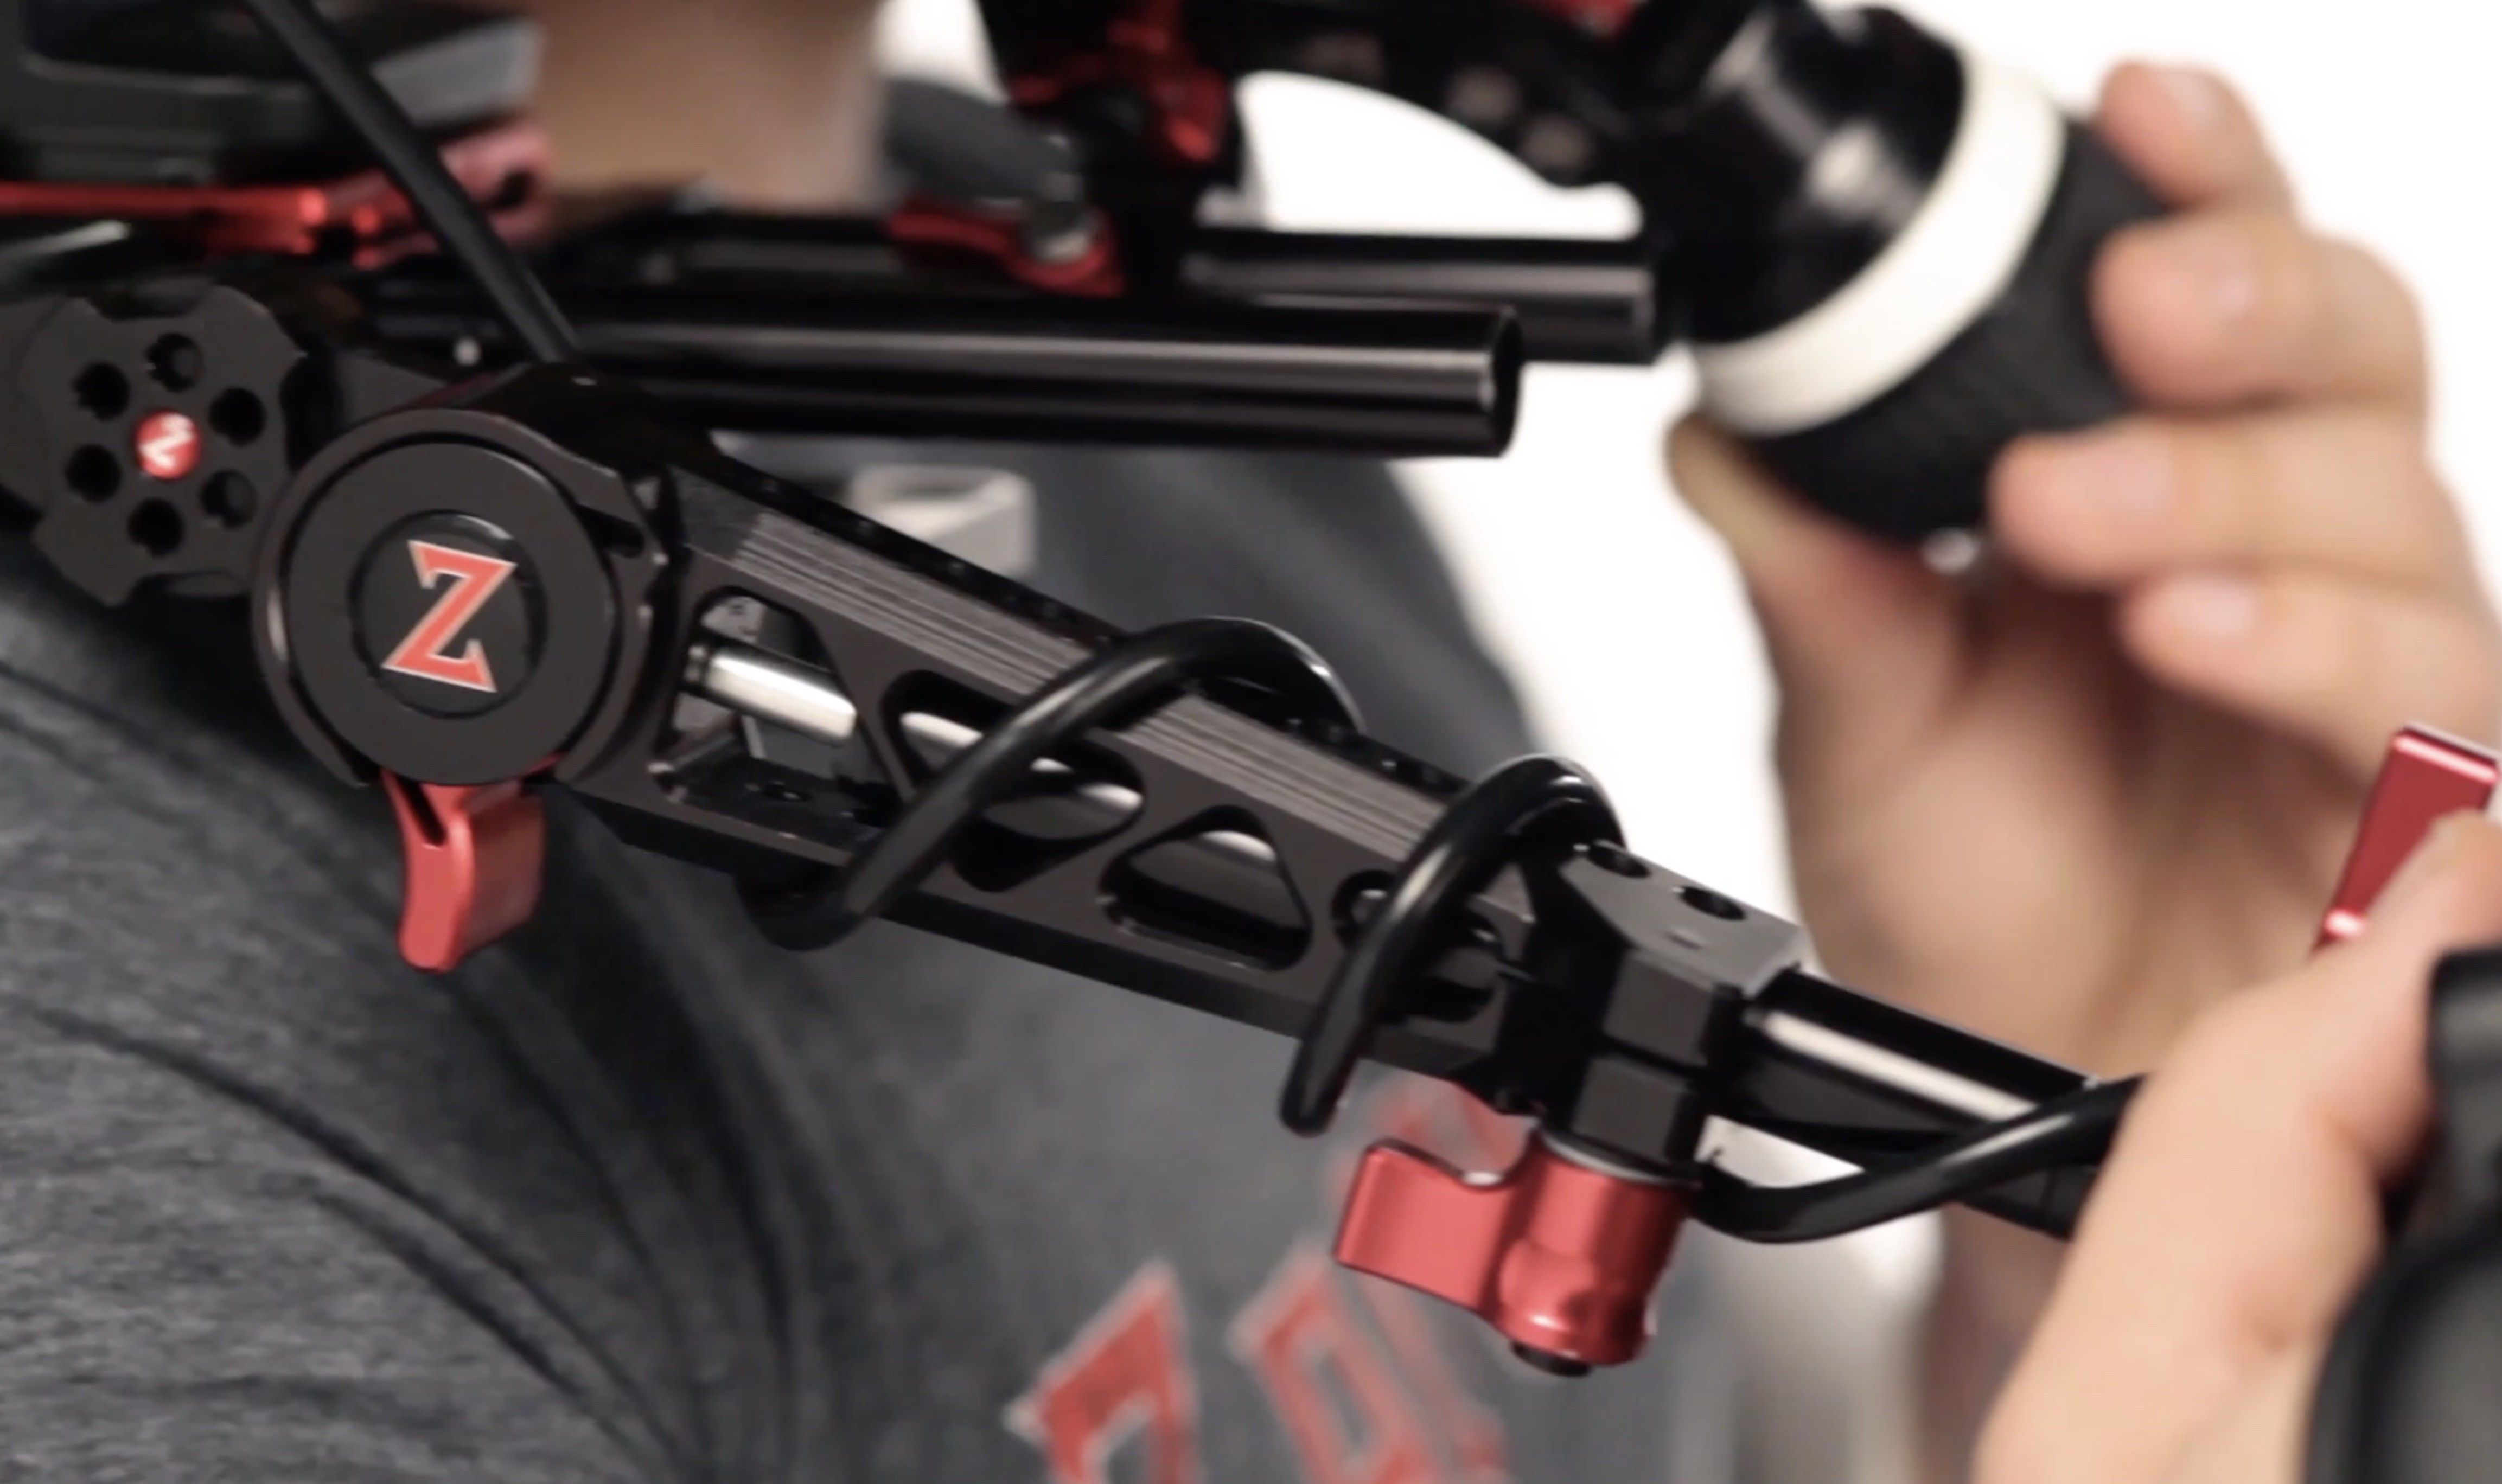 Zacuto's Zgrip Trigger Might Be the Most Adjustable Grip on the Market